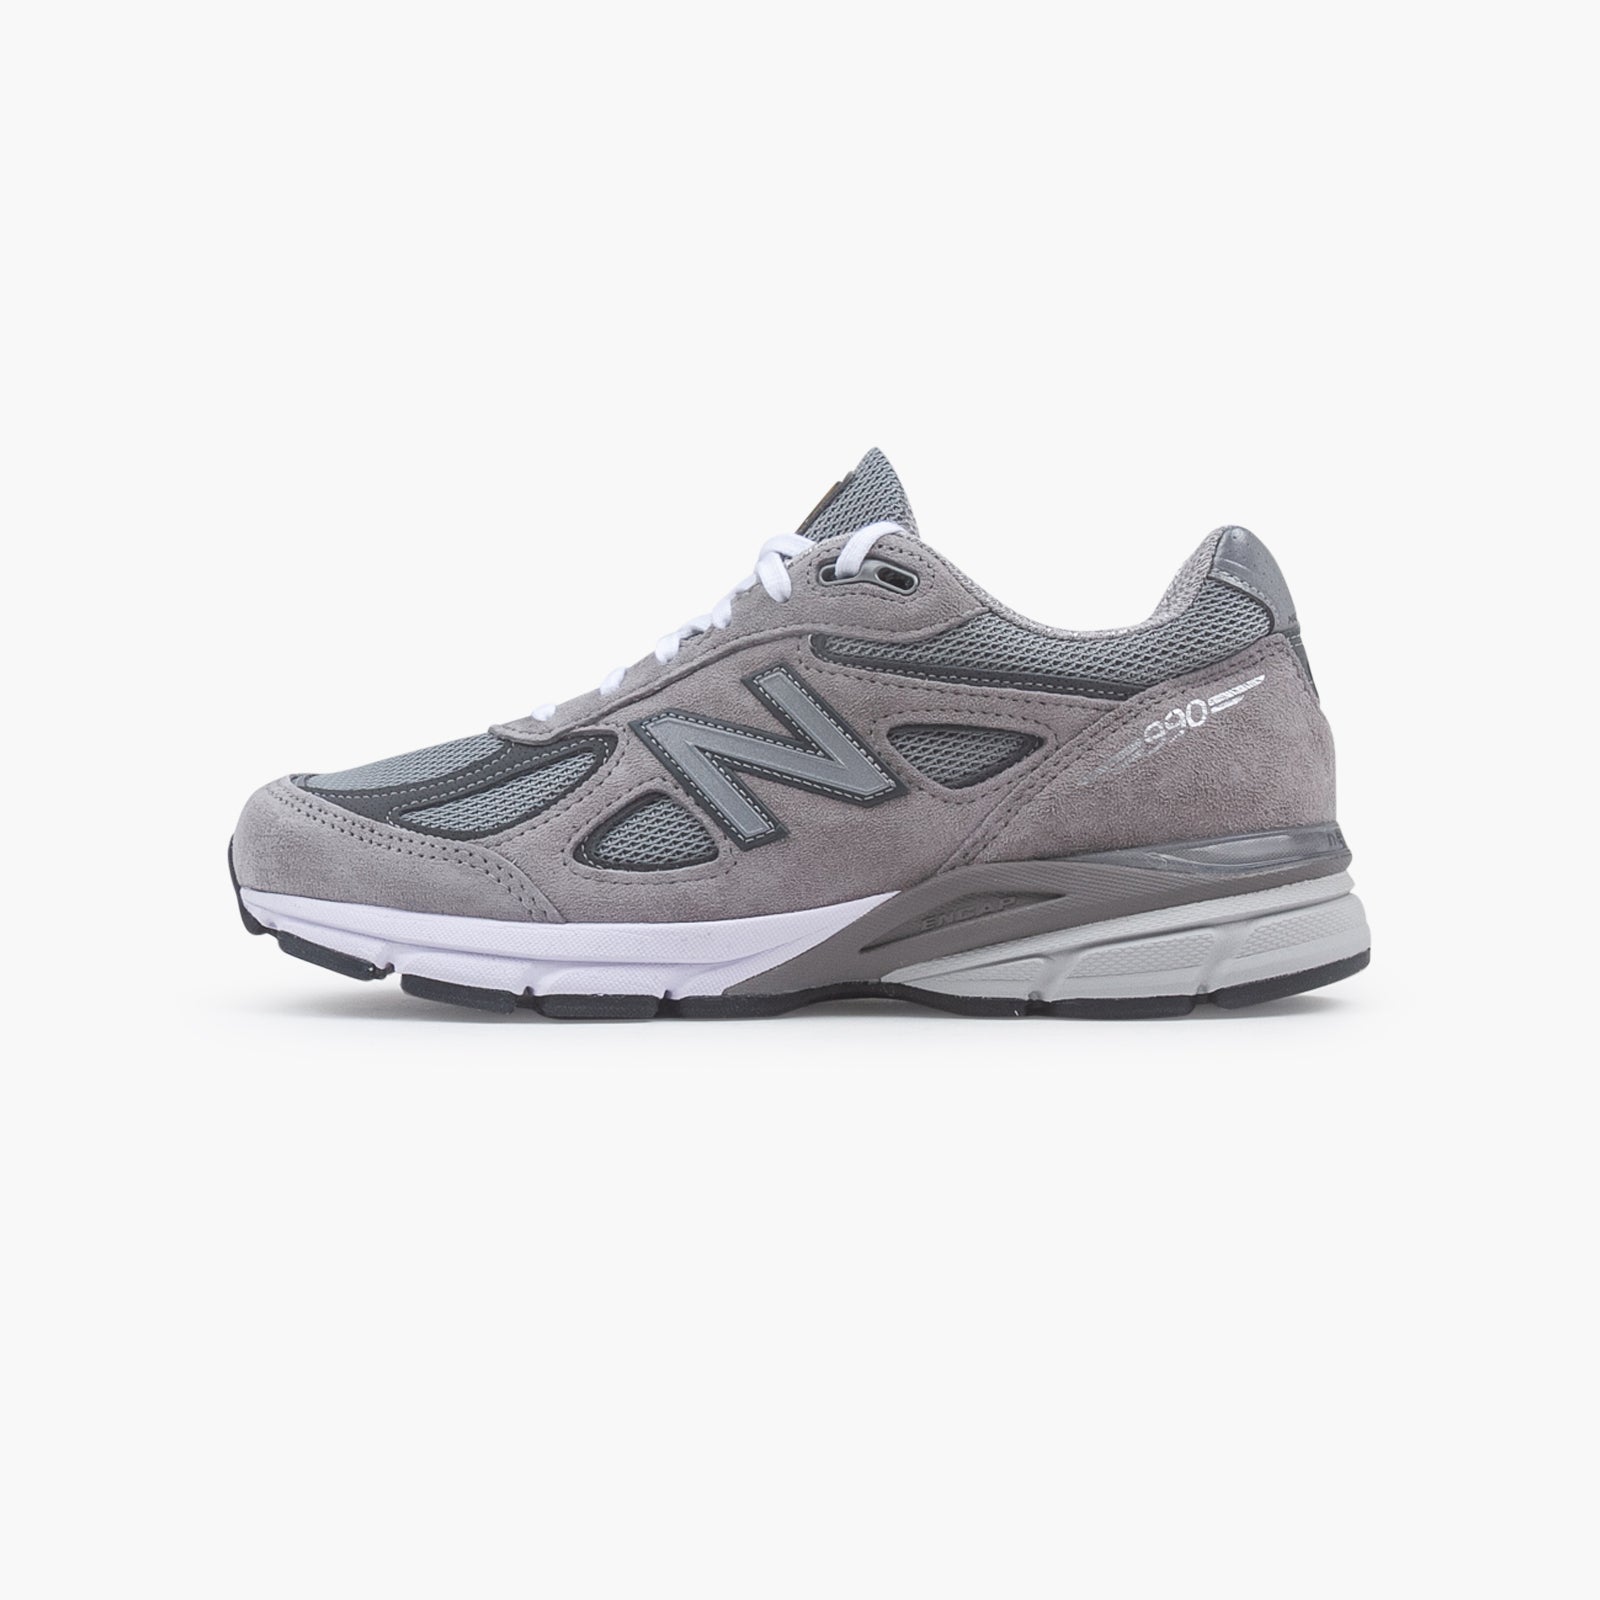 New Balance 990v4 Made in USA-SUEDE Store